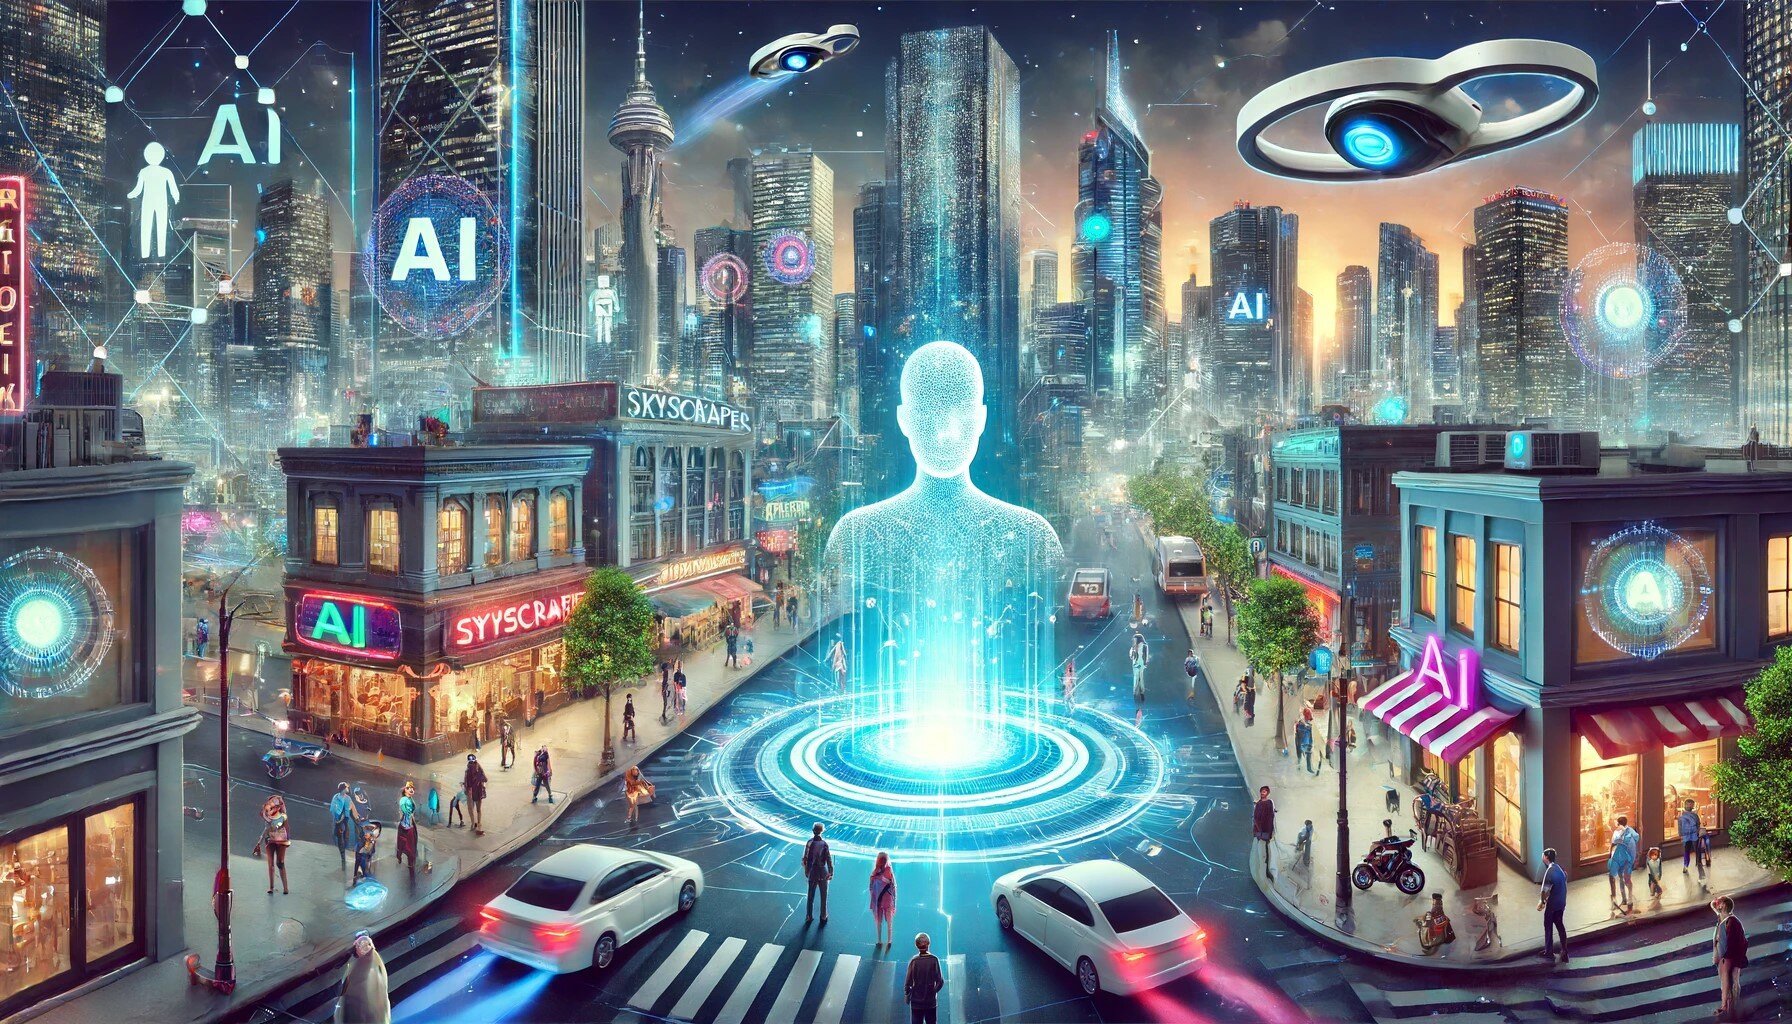 ChatGPT's view of a futuristic city with AI